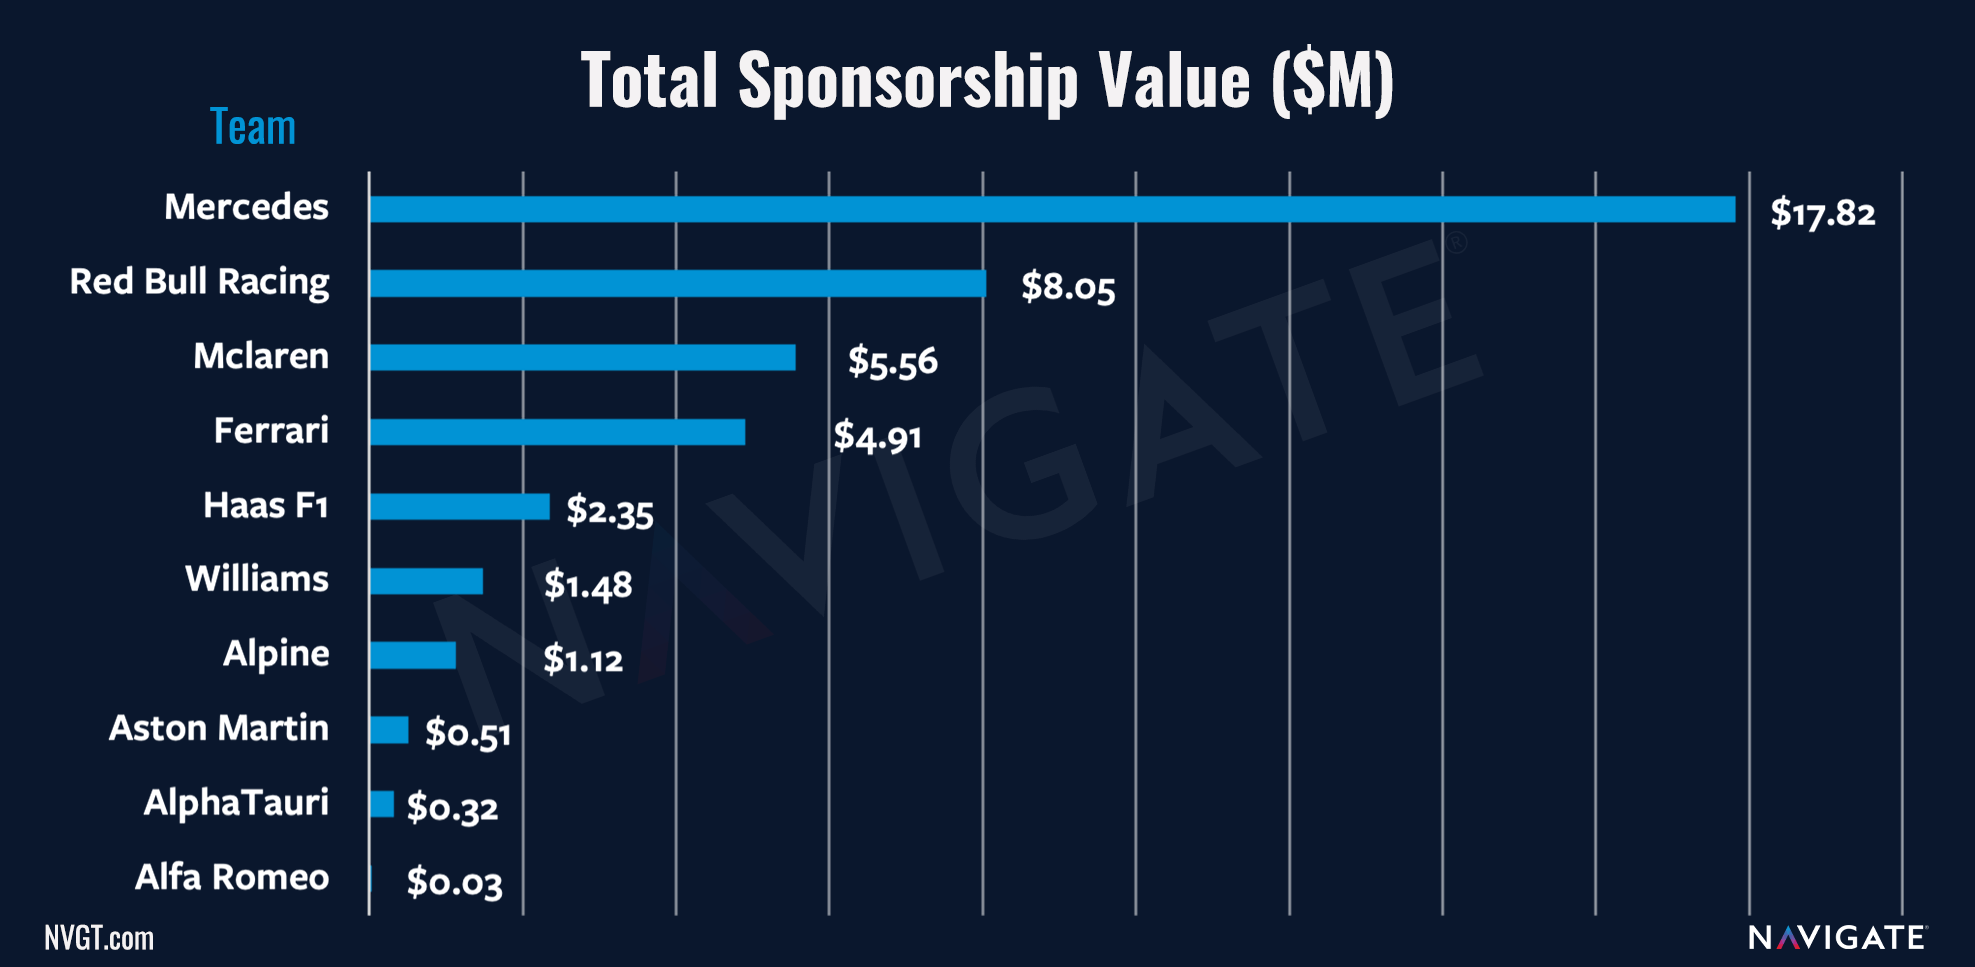 Total Formula 1 Sponsorship Value from Drive to Survive